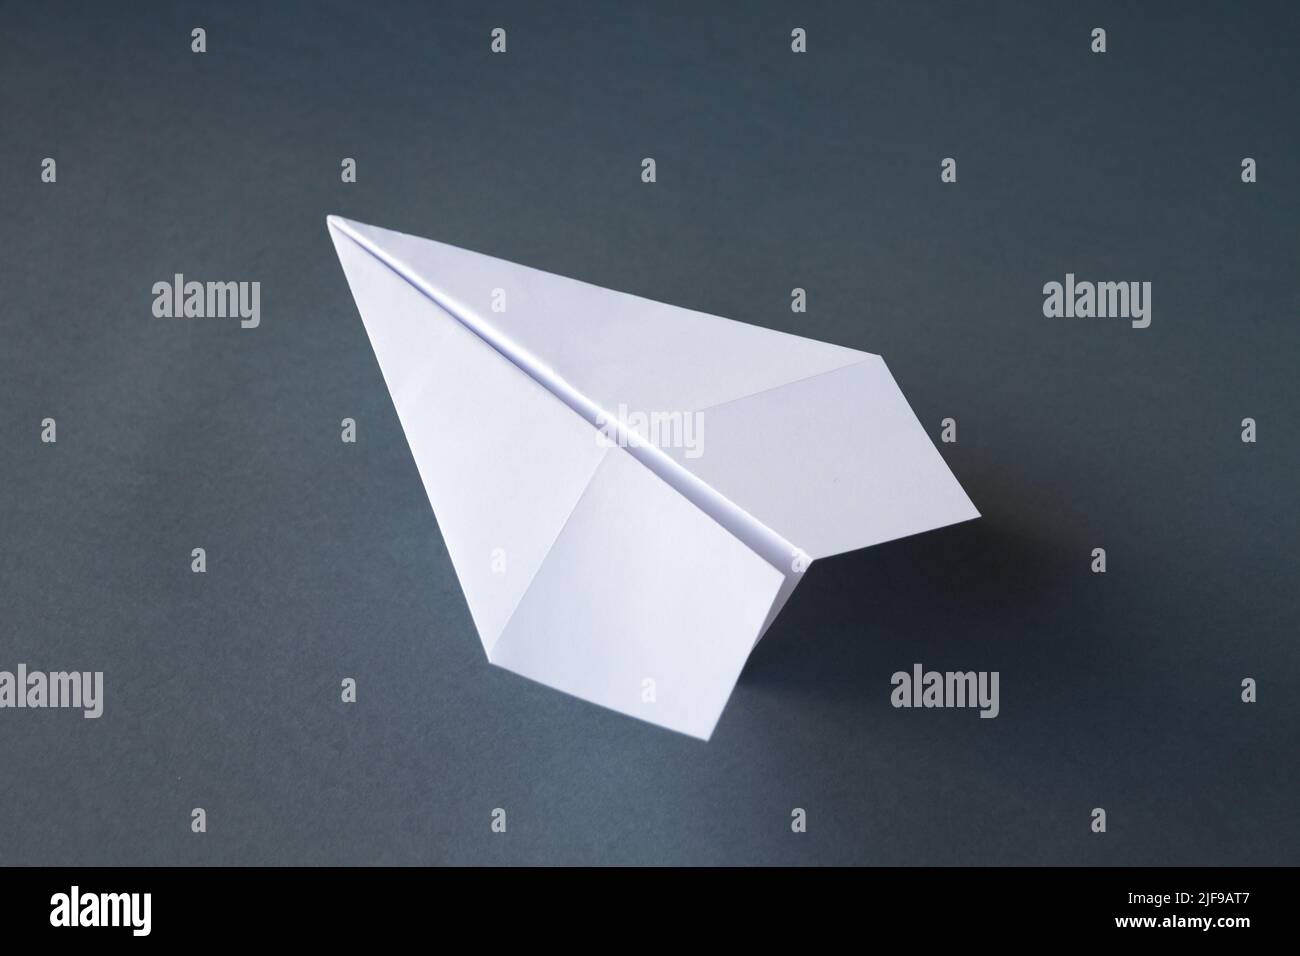 White paper plane origami isolated on a blank grey background Stock Photo